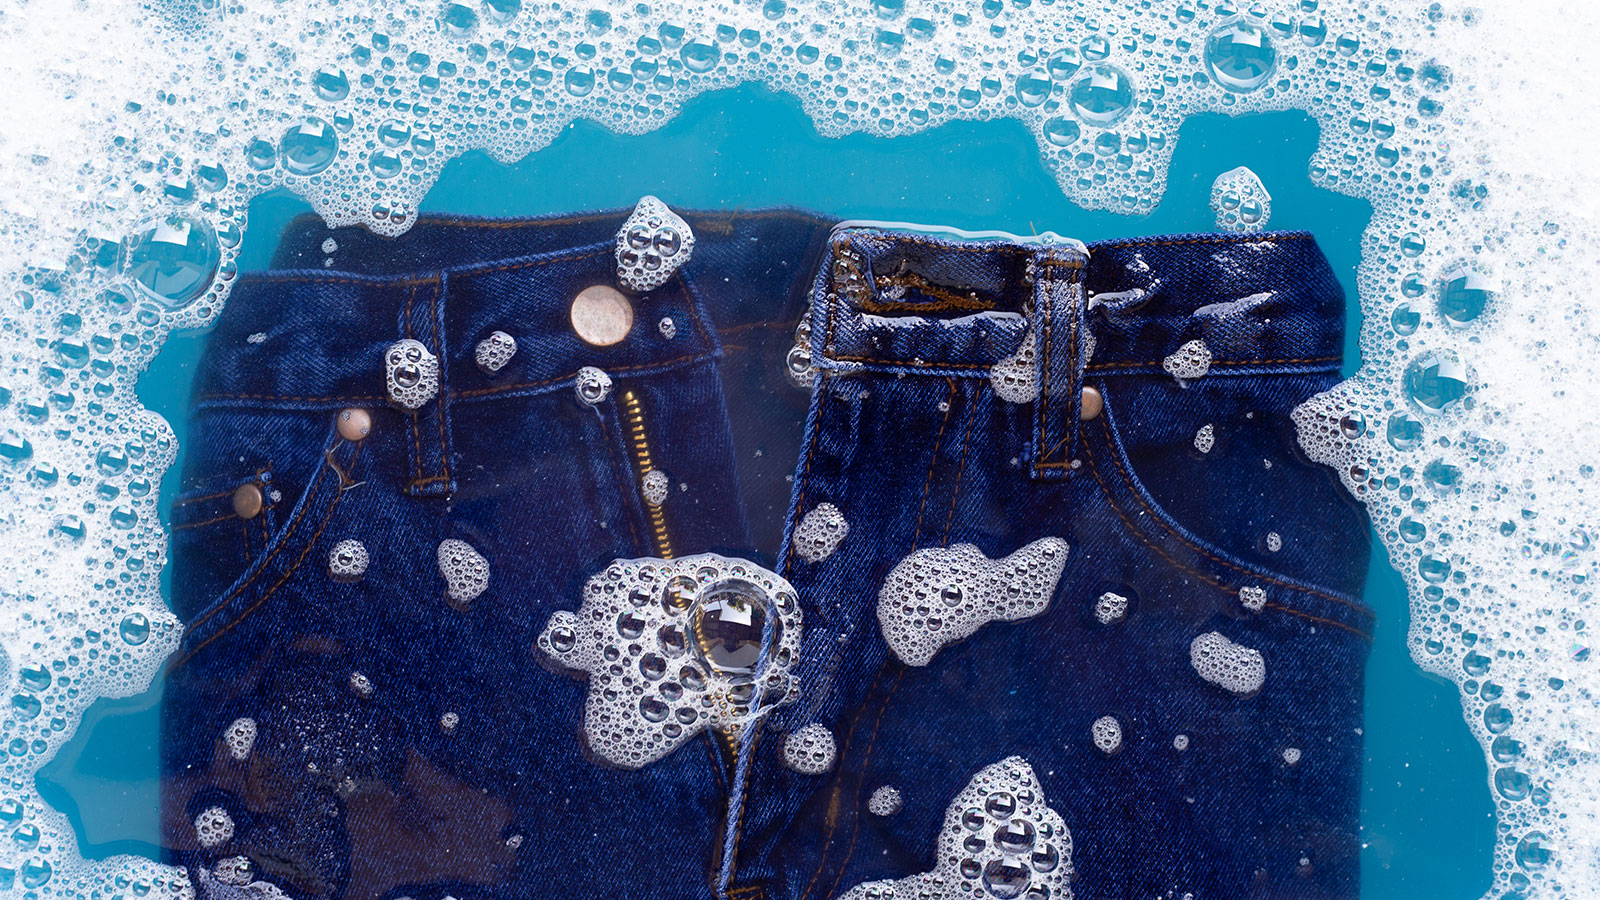 View of jeans being washed in water with soap bubbles